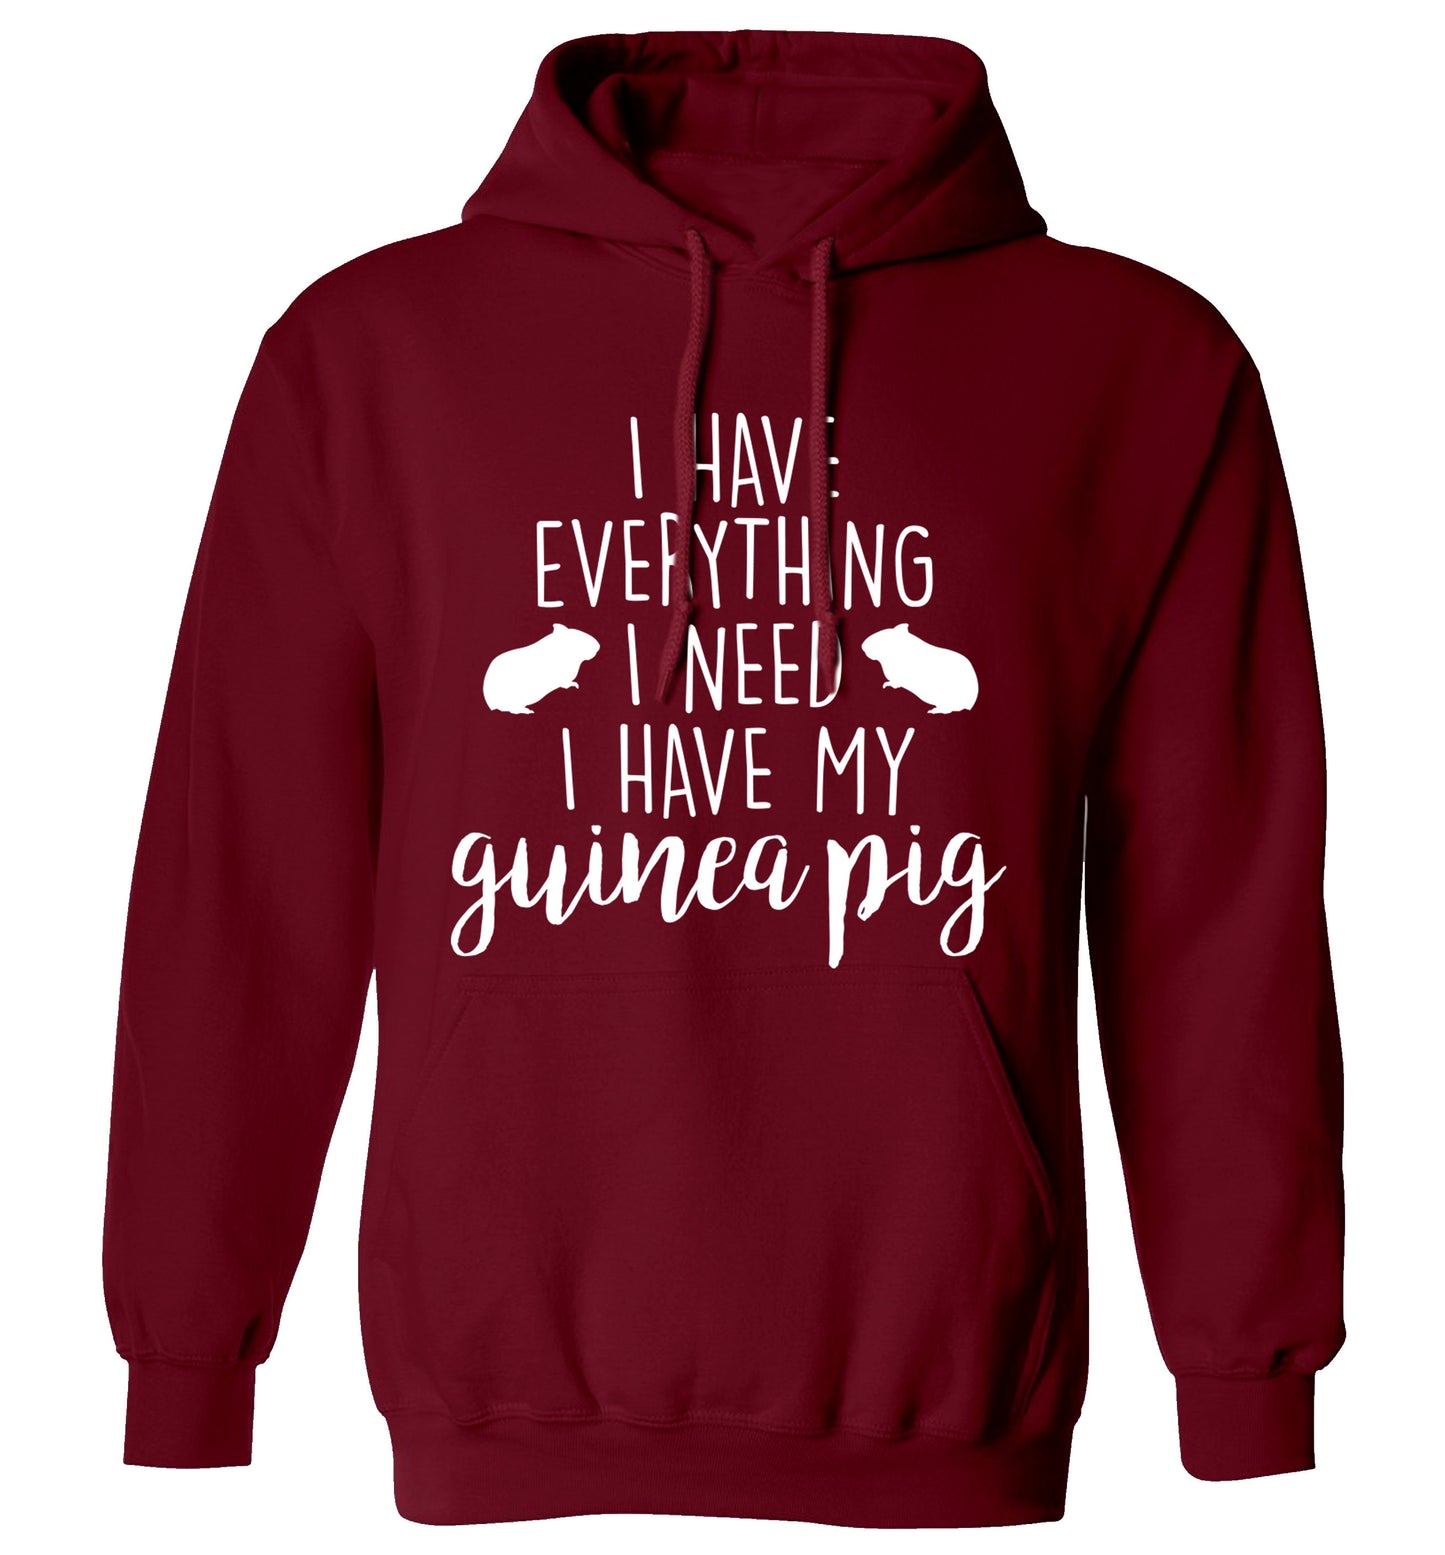 I have everything I need, I have my guinea pig adults unisex maroon hoodie 2XL